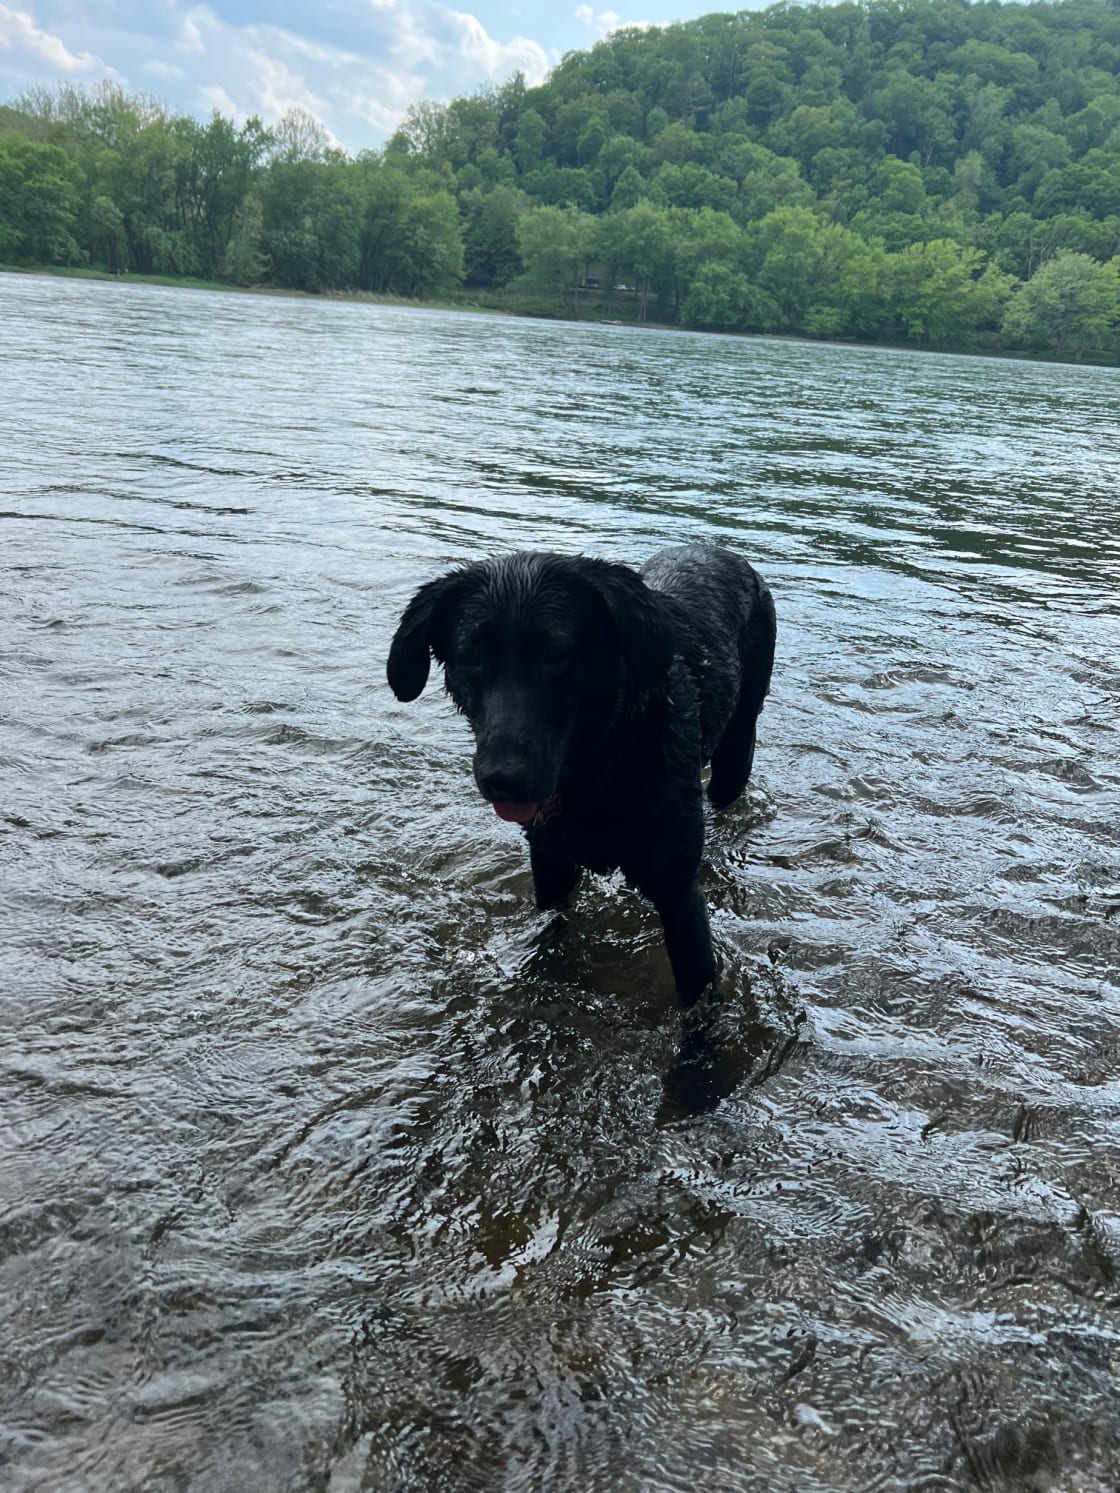 Our pup loves swimming and playing fetch in the Allegheny!